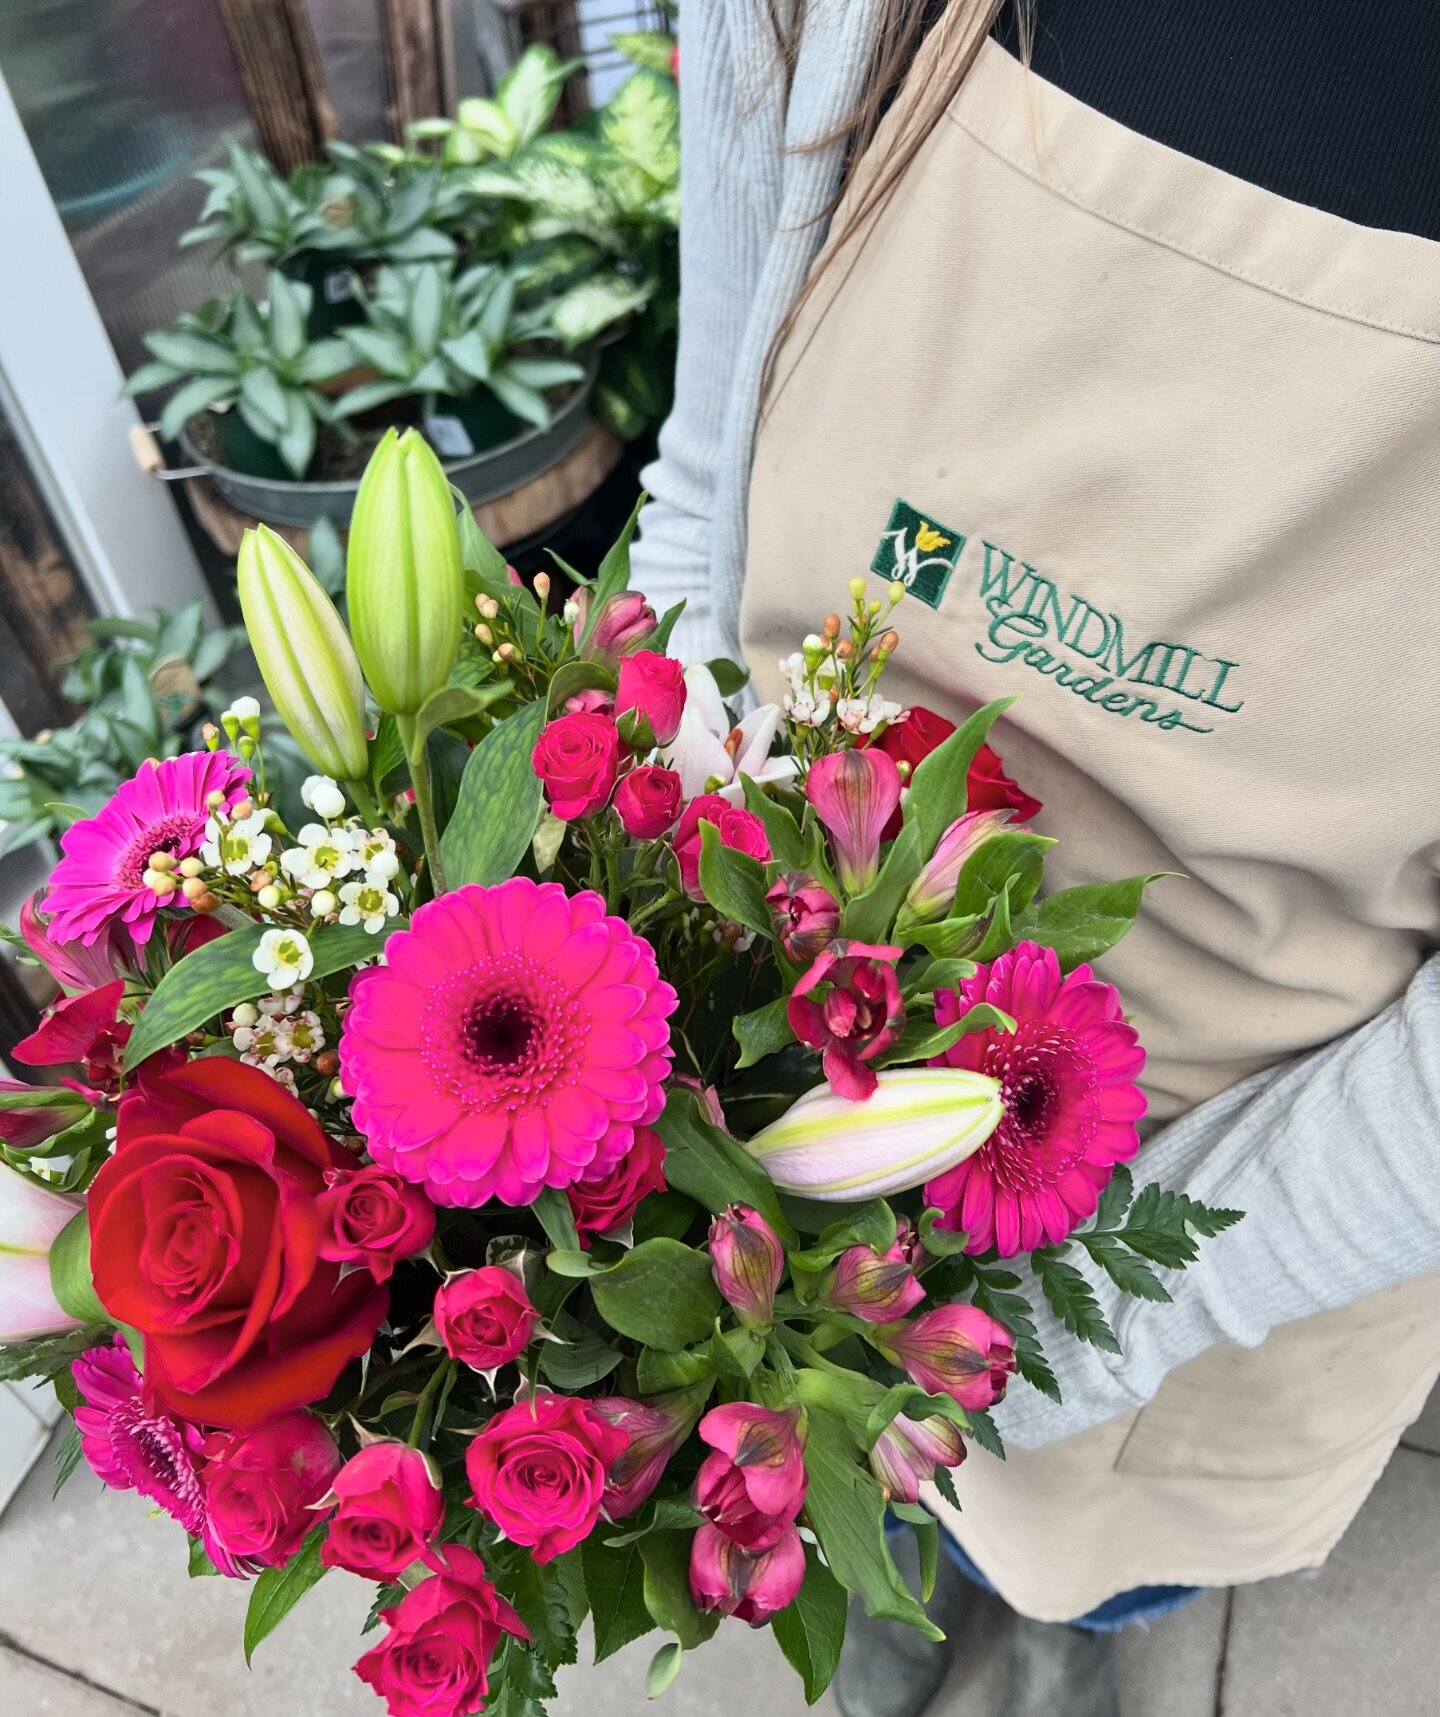 It&rsquo;s not too late to order flowers for your Valentine! 💌 

To Order:
&bull; Give us a call at (253)891-7631
&bull; Order online at https://windmillfloralstudio.net
&bull; Or stop by our shop in town! We&rsquo;re open 9-5 daily.

@windmill_flor